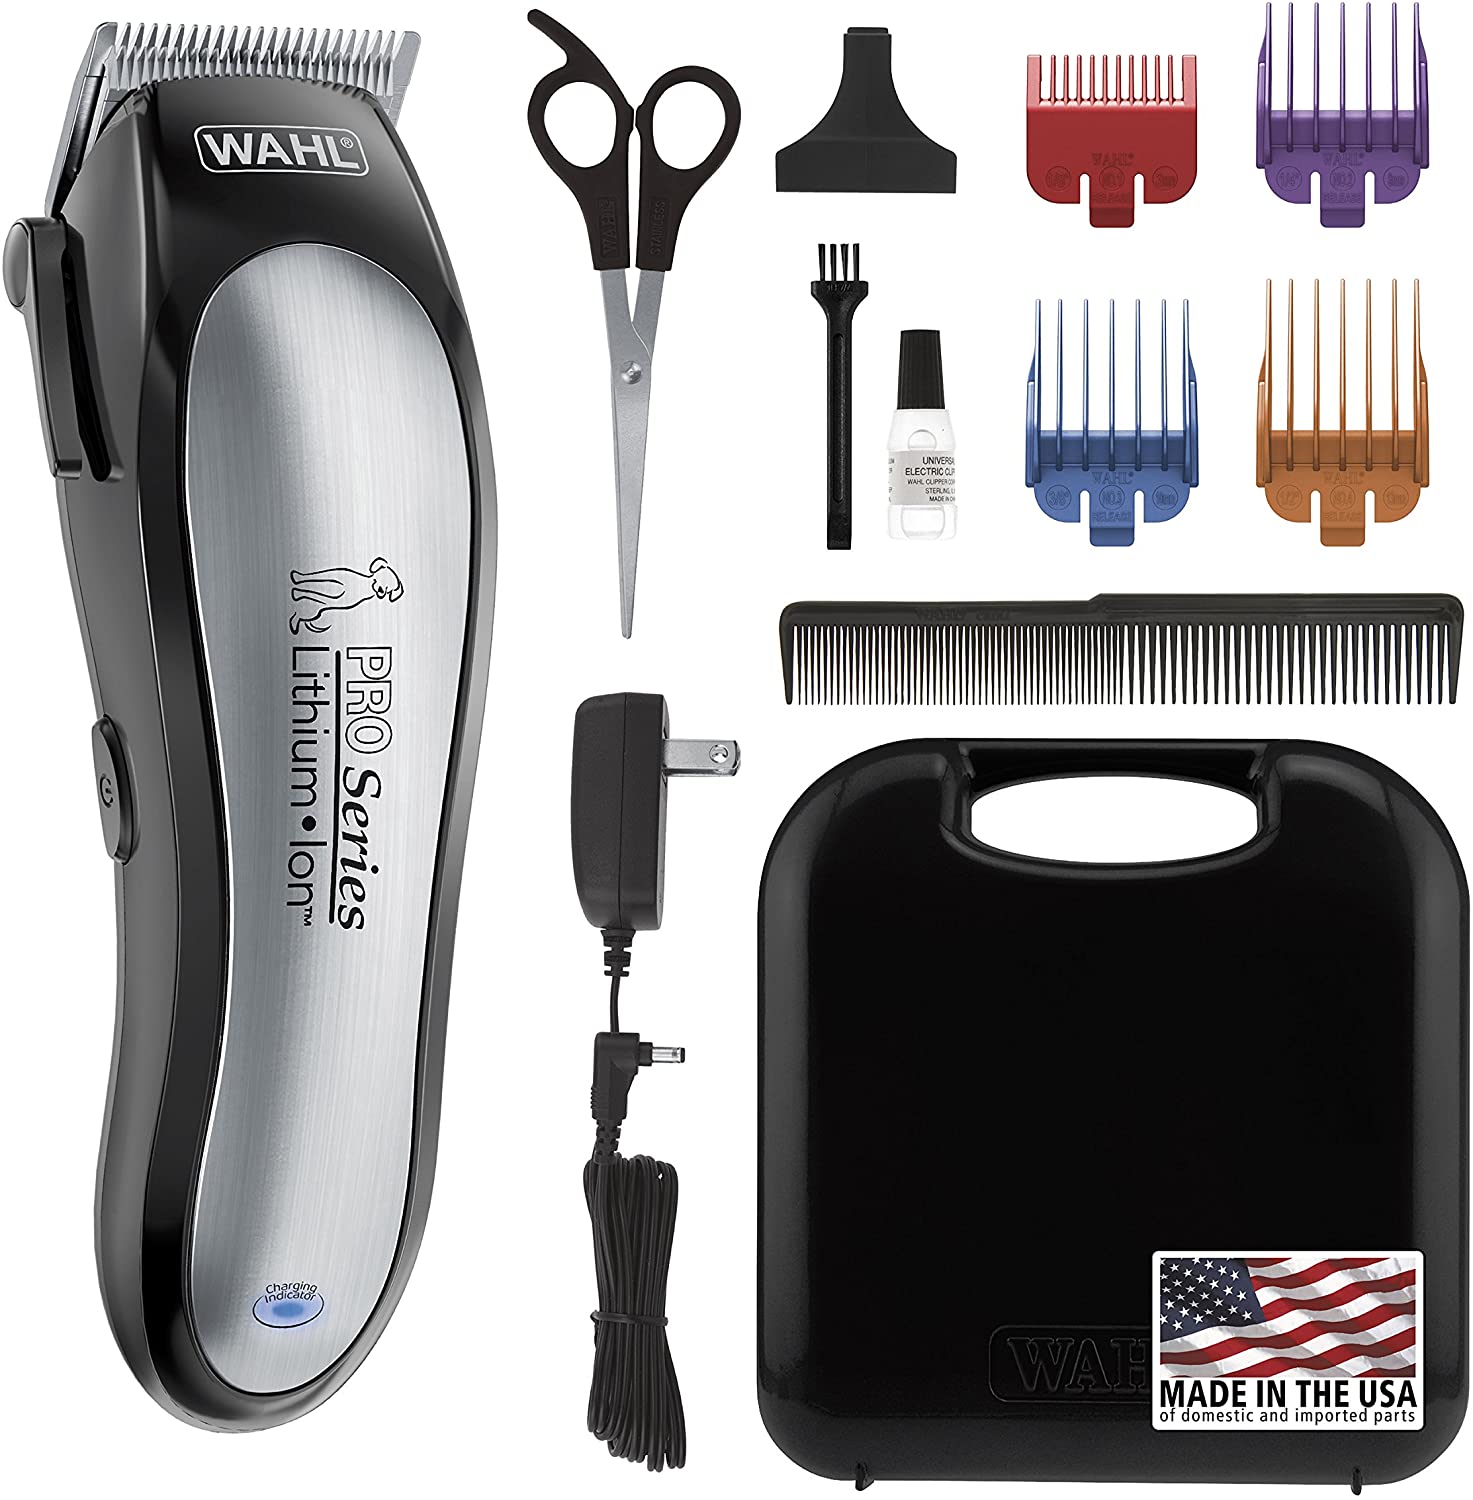 🥇10 Best Dog Grooming Clippers to Buy in (February 2021) Buyer’s Guide